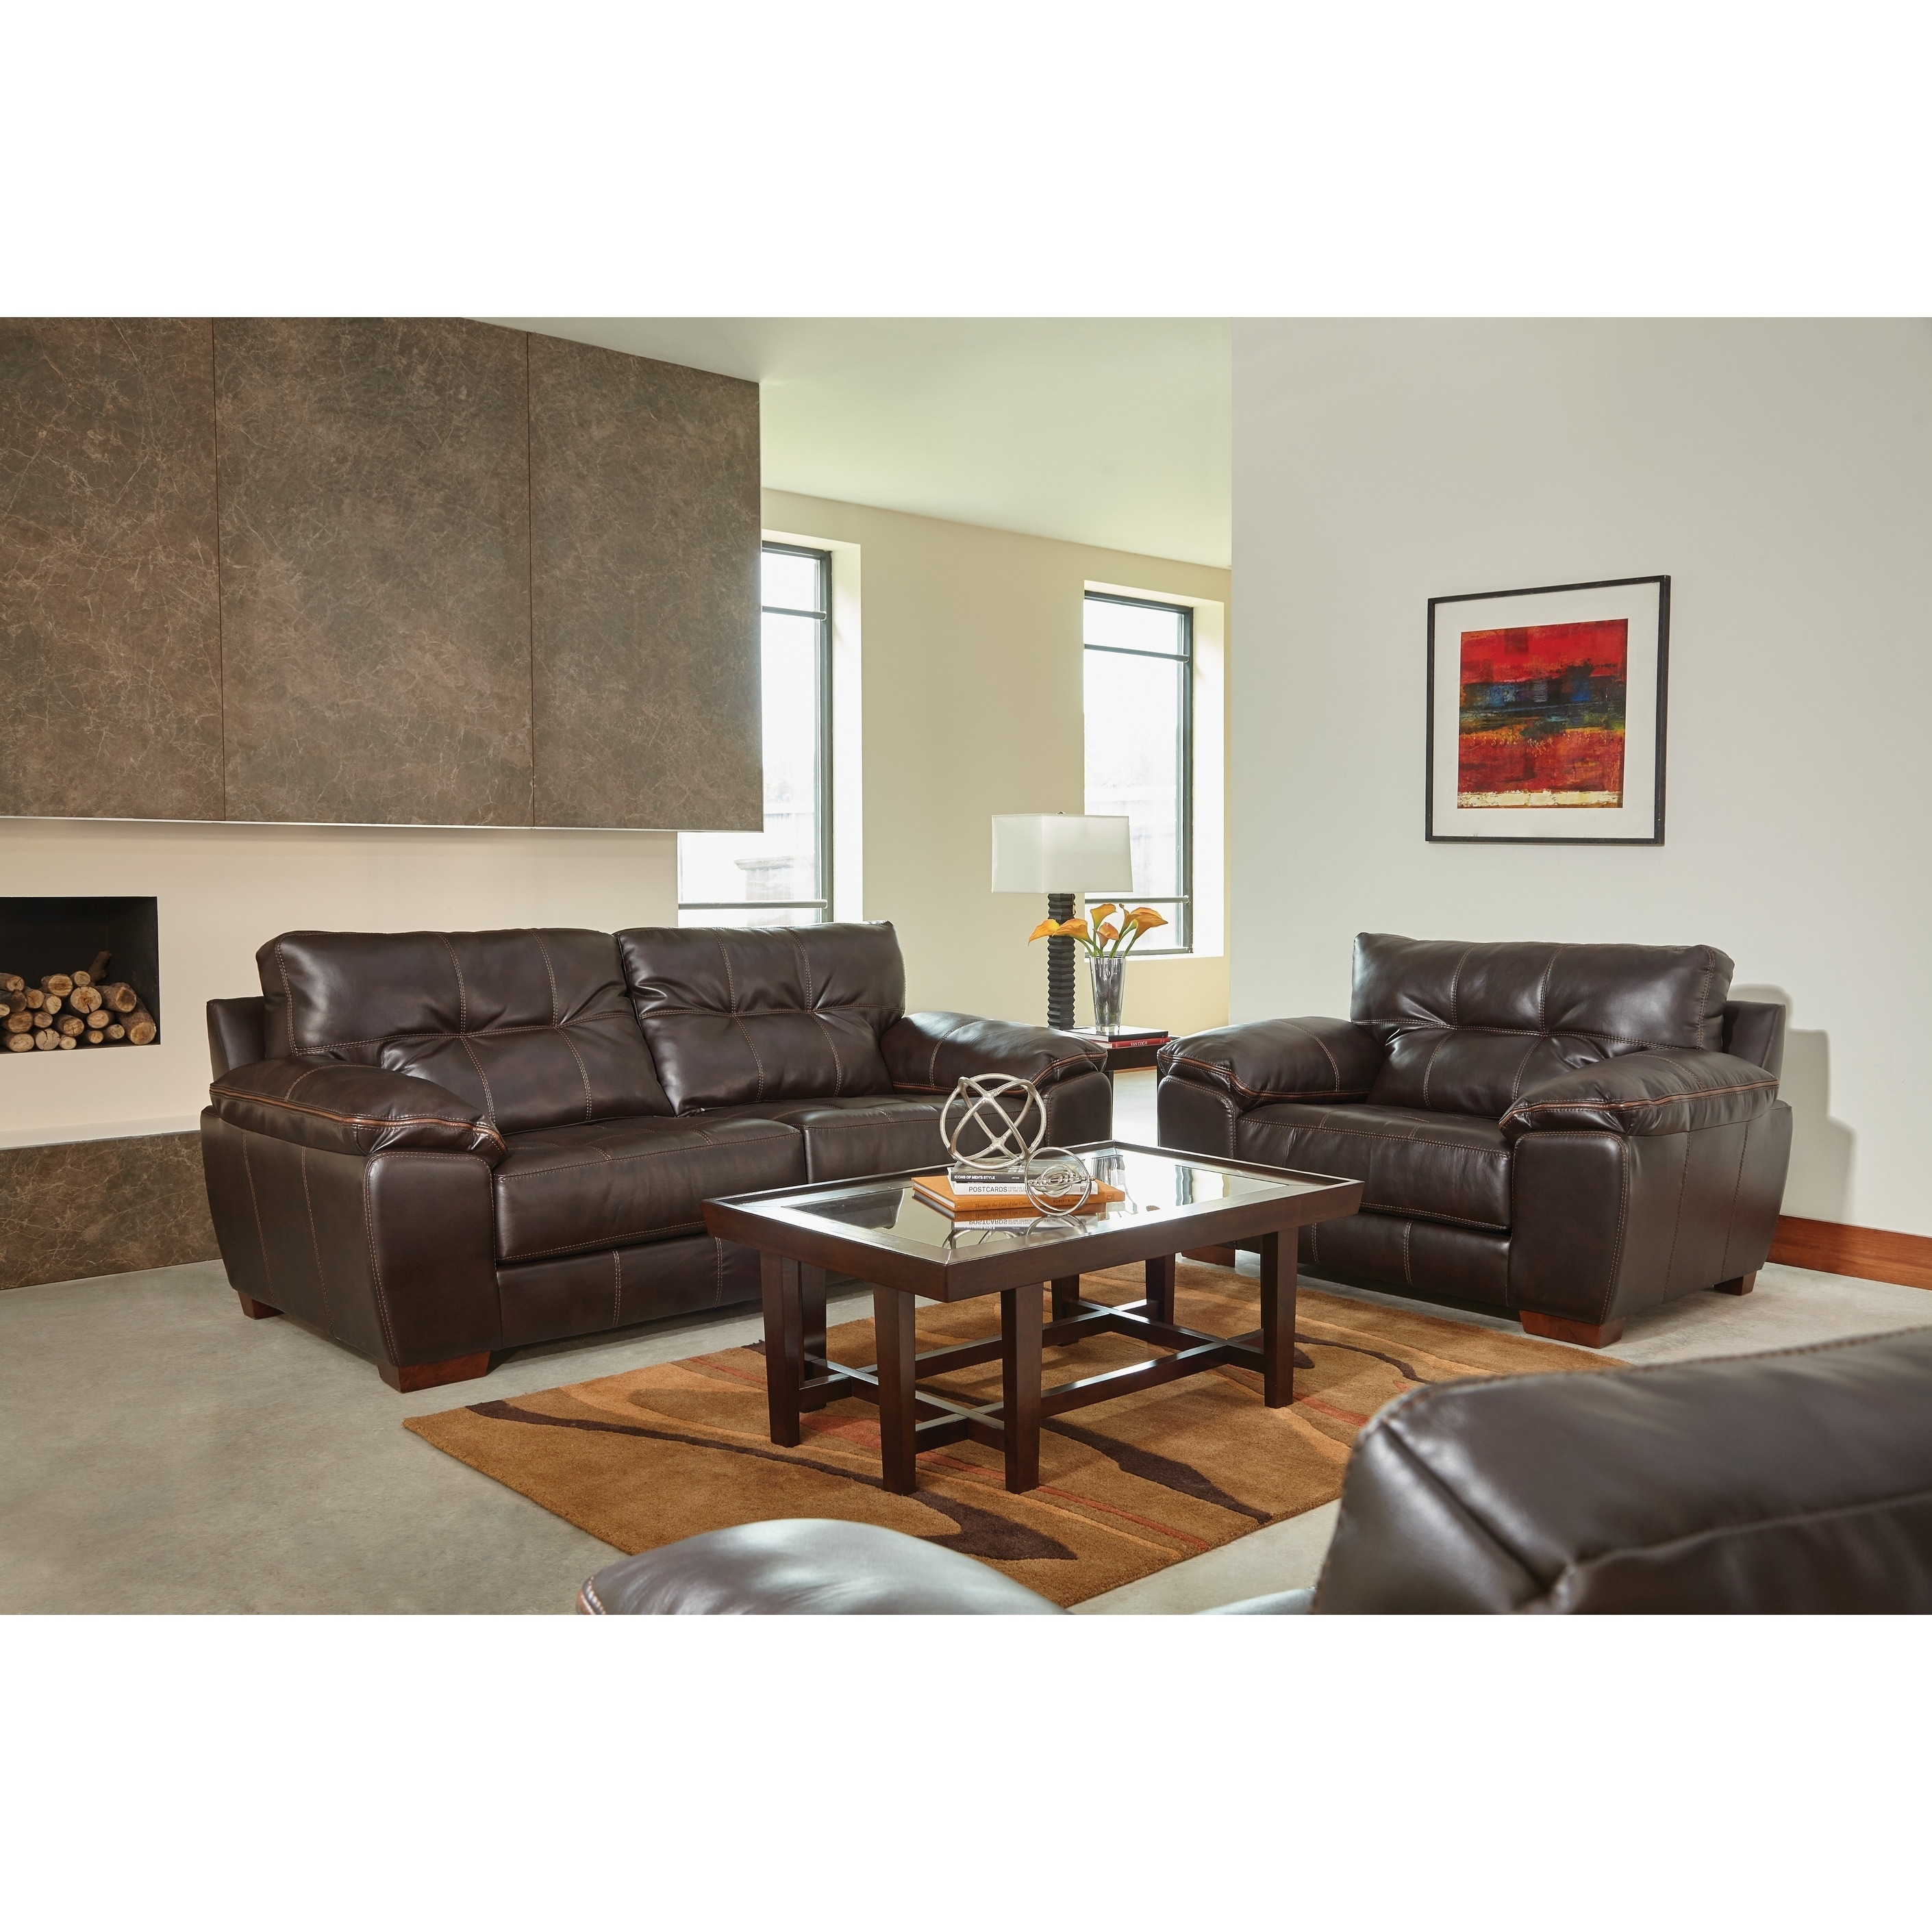 Elmer Faux Leather Sofa And Chair Living Room Set Overstock 29587351